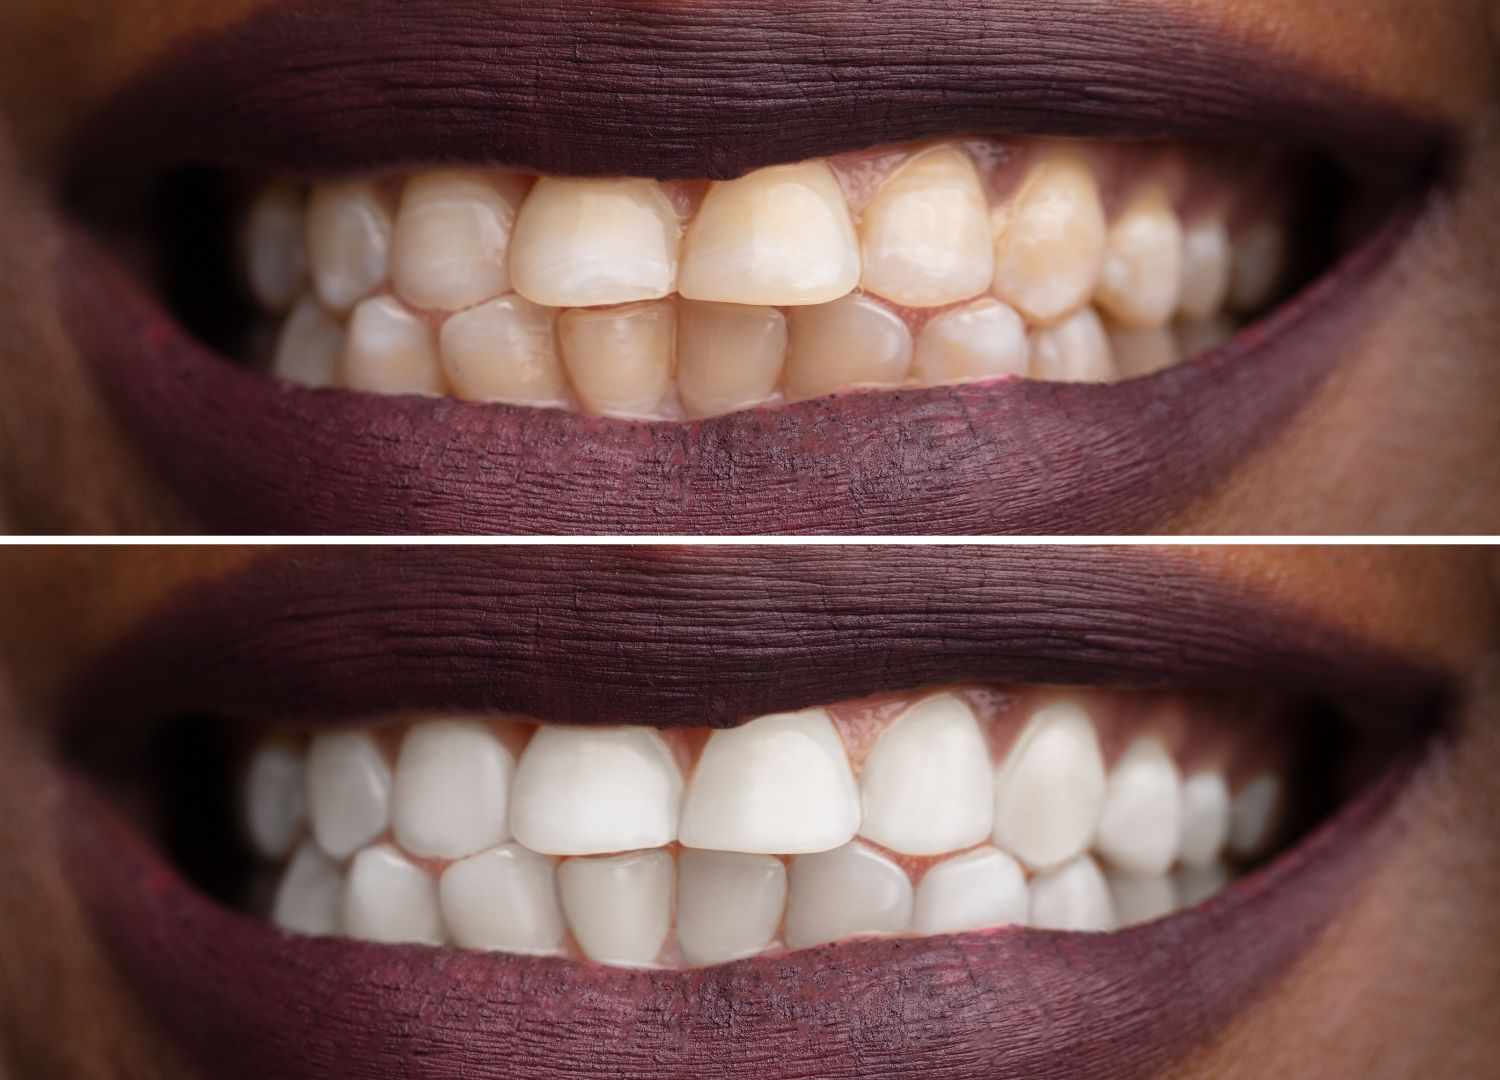 " 7 Things you should know about  teeth whitening"